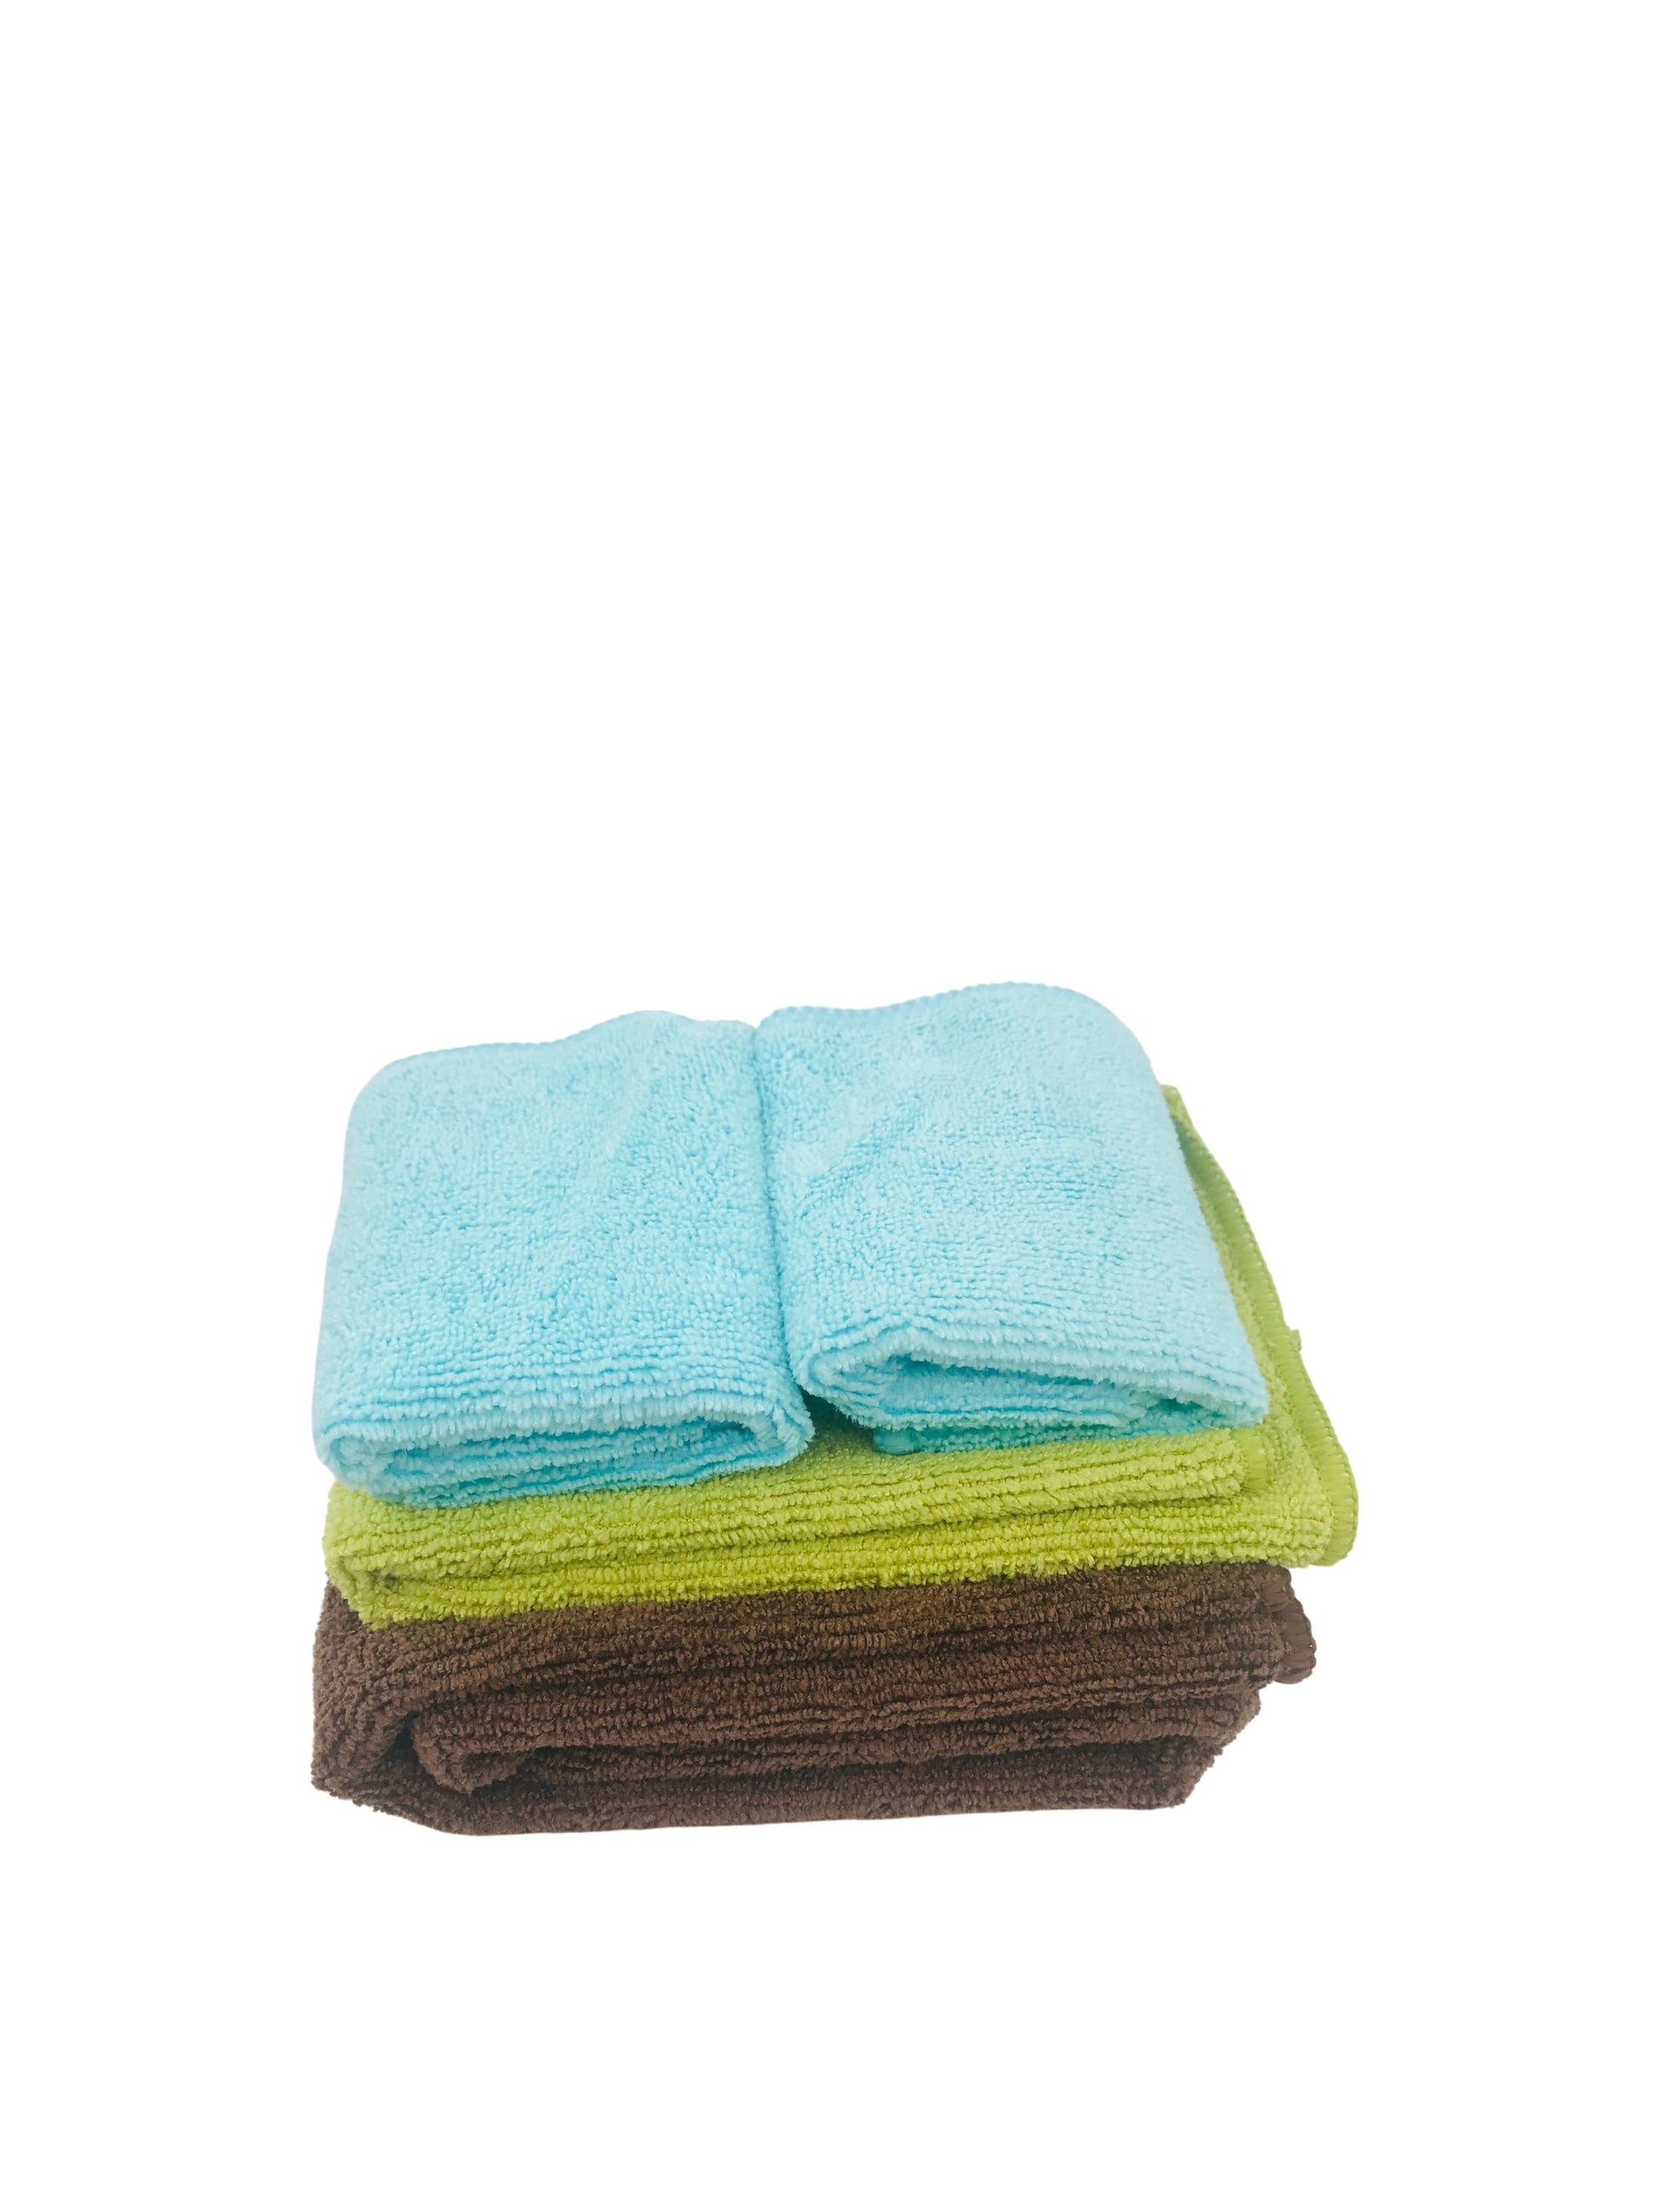 Coffee Bar Square Towels Barista Cleaning Cloths 4 Pack Espresso